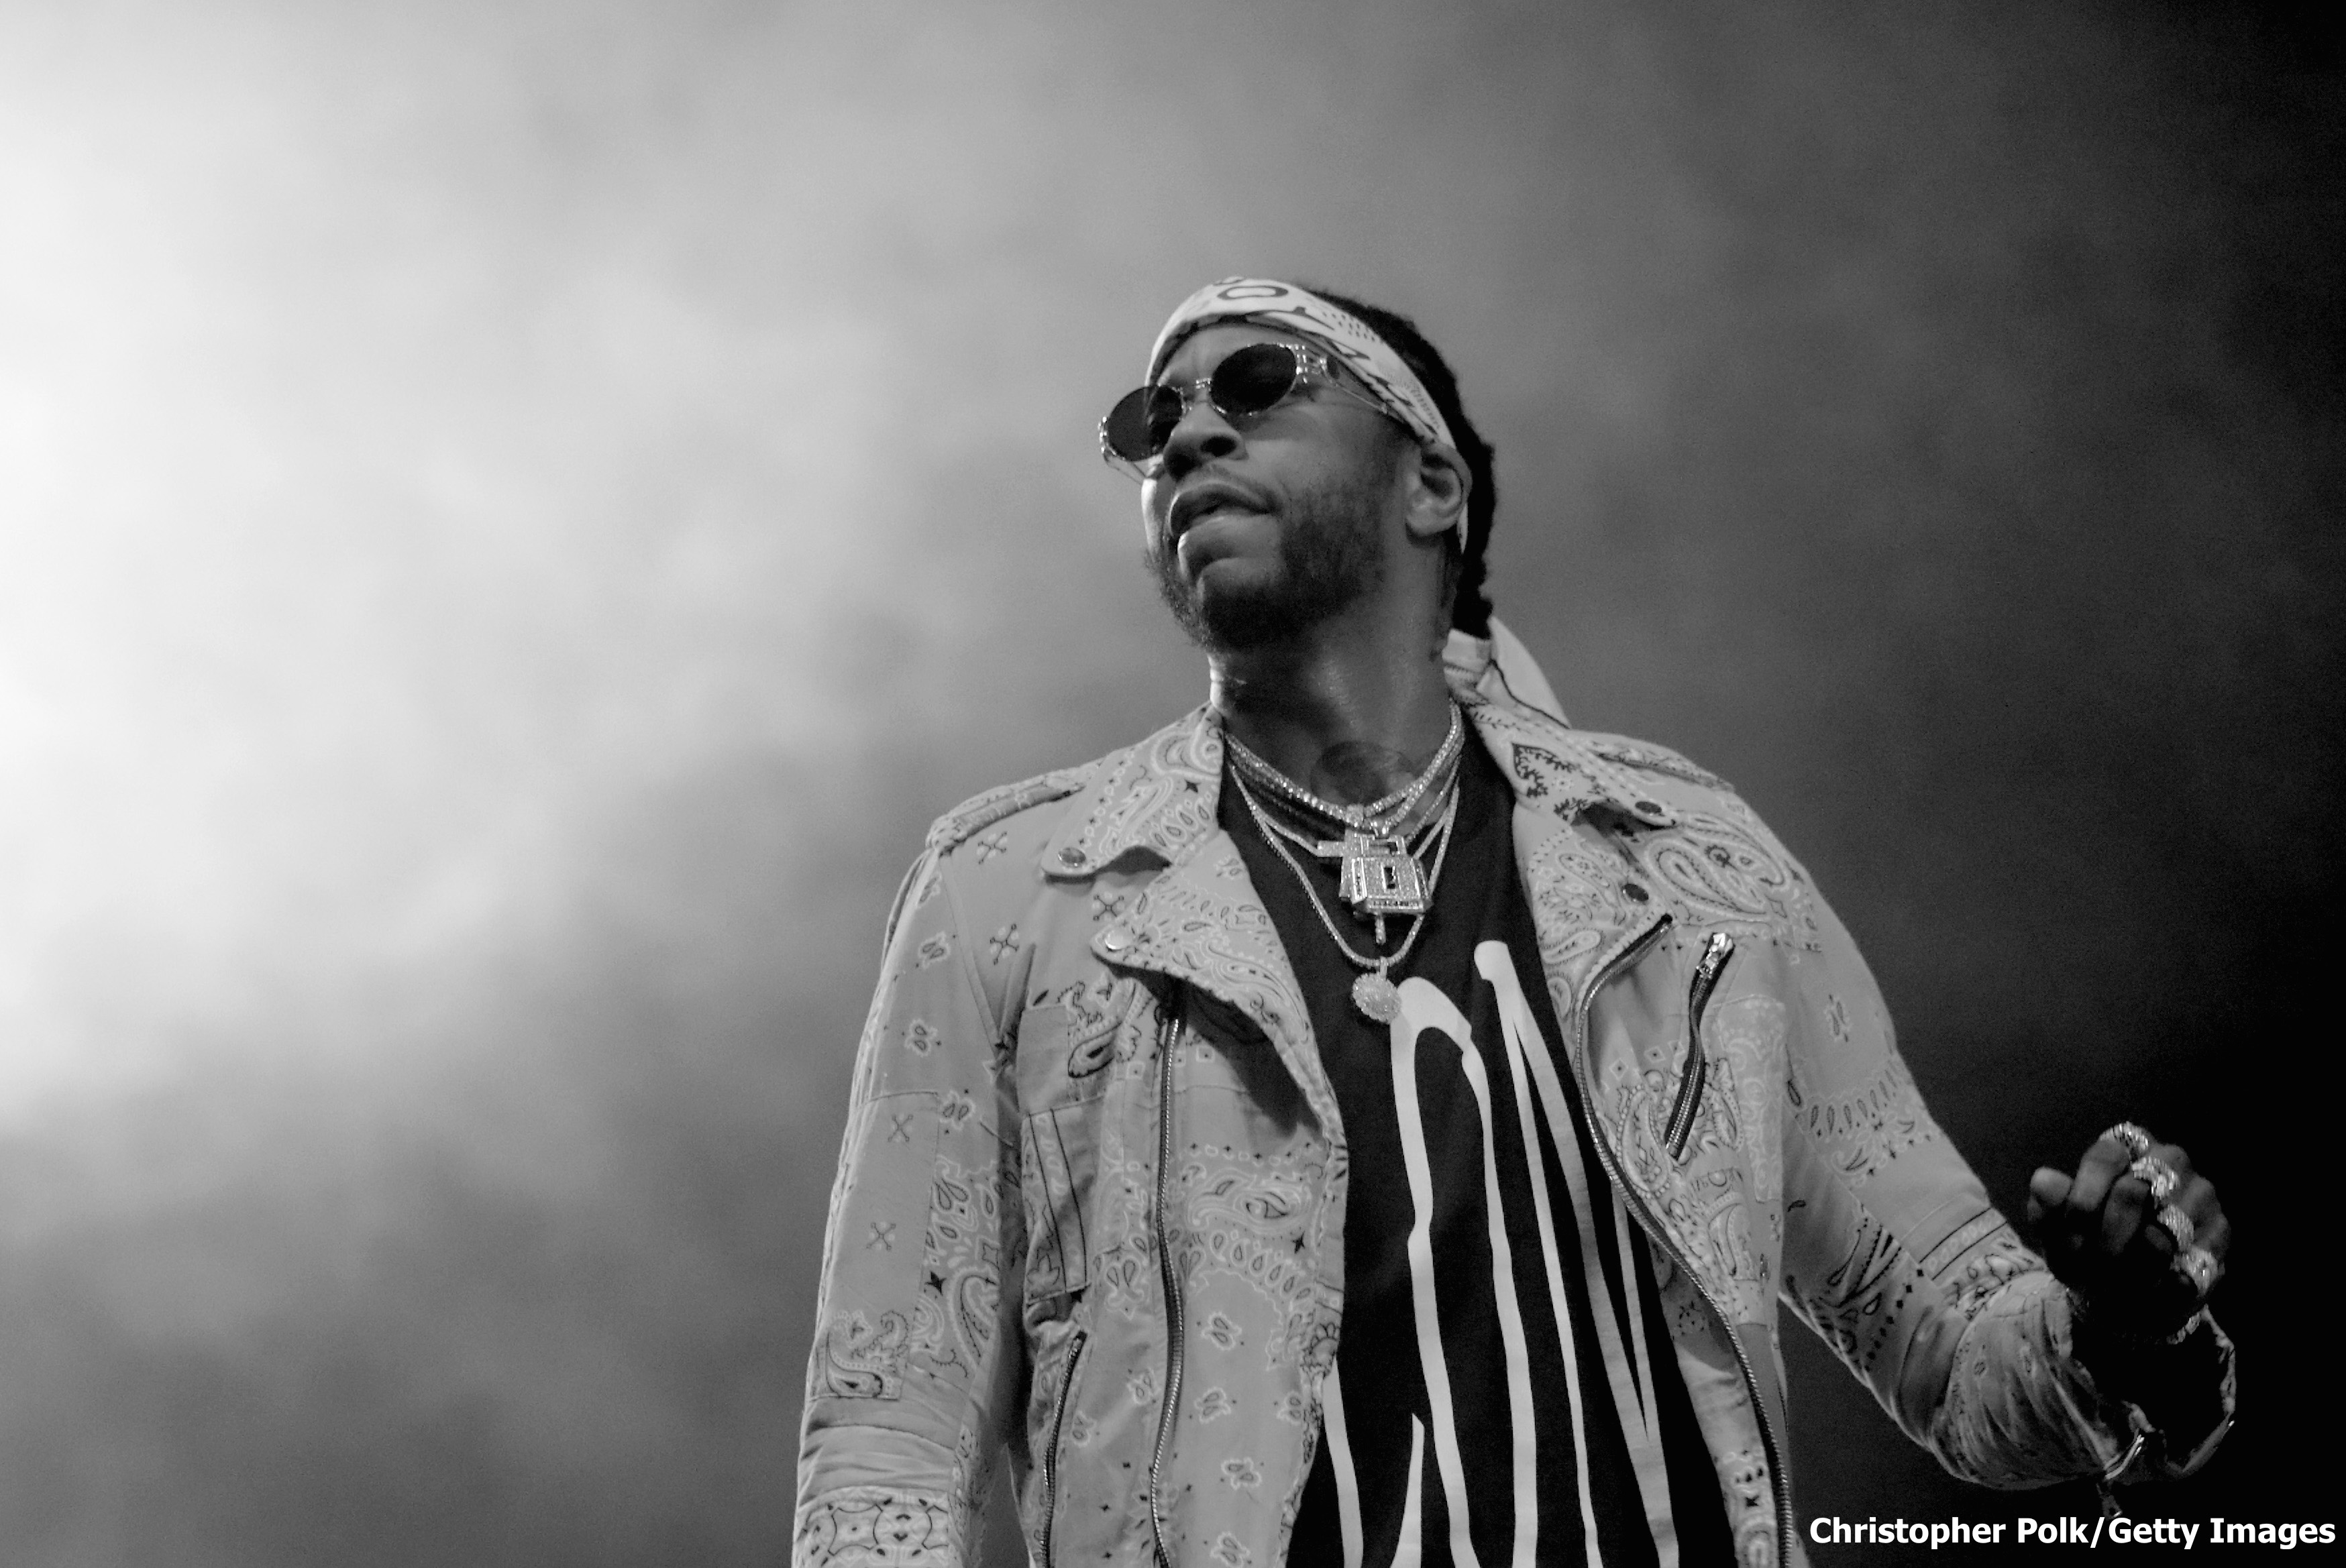 5 Things We Want From 2 Chainz’s “Pretty Girls Like Trap Music”